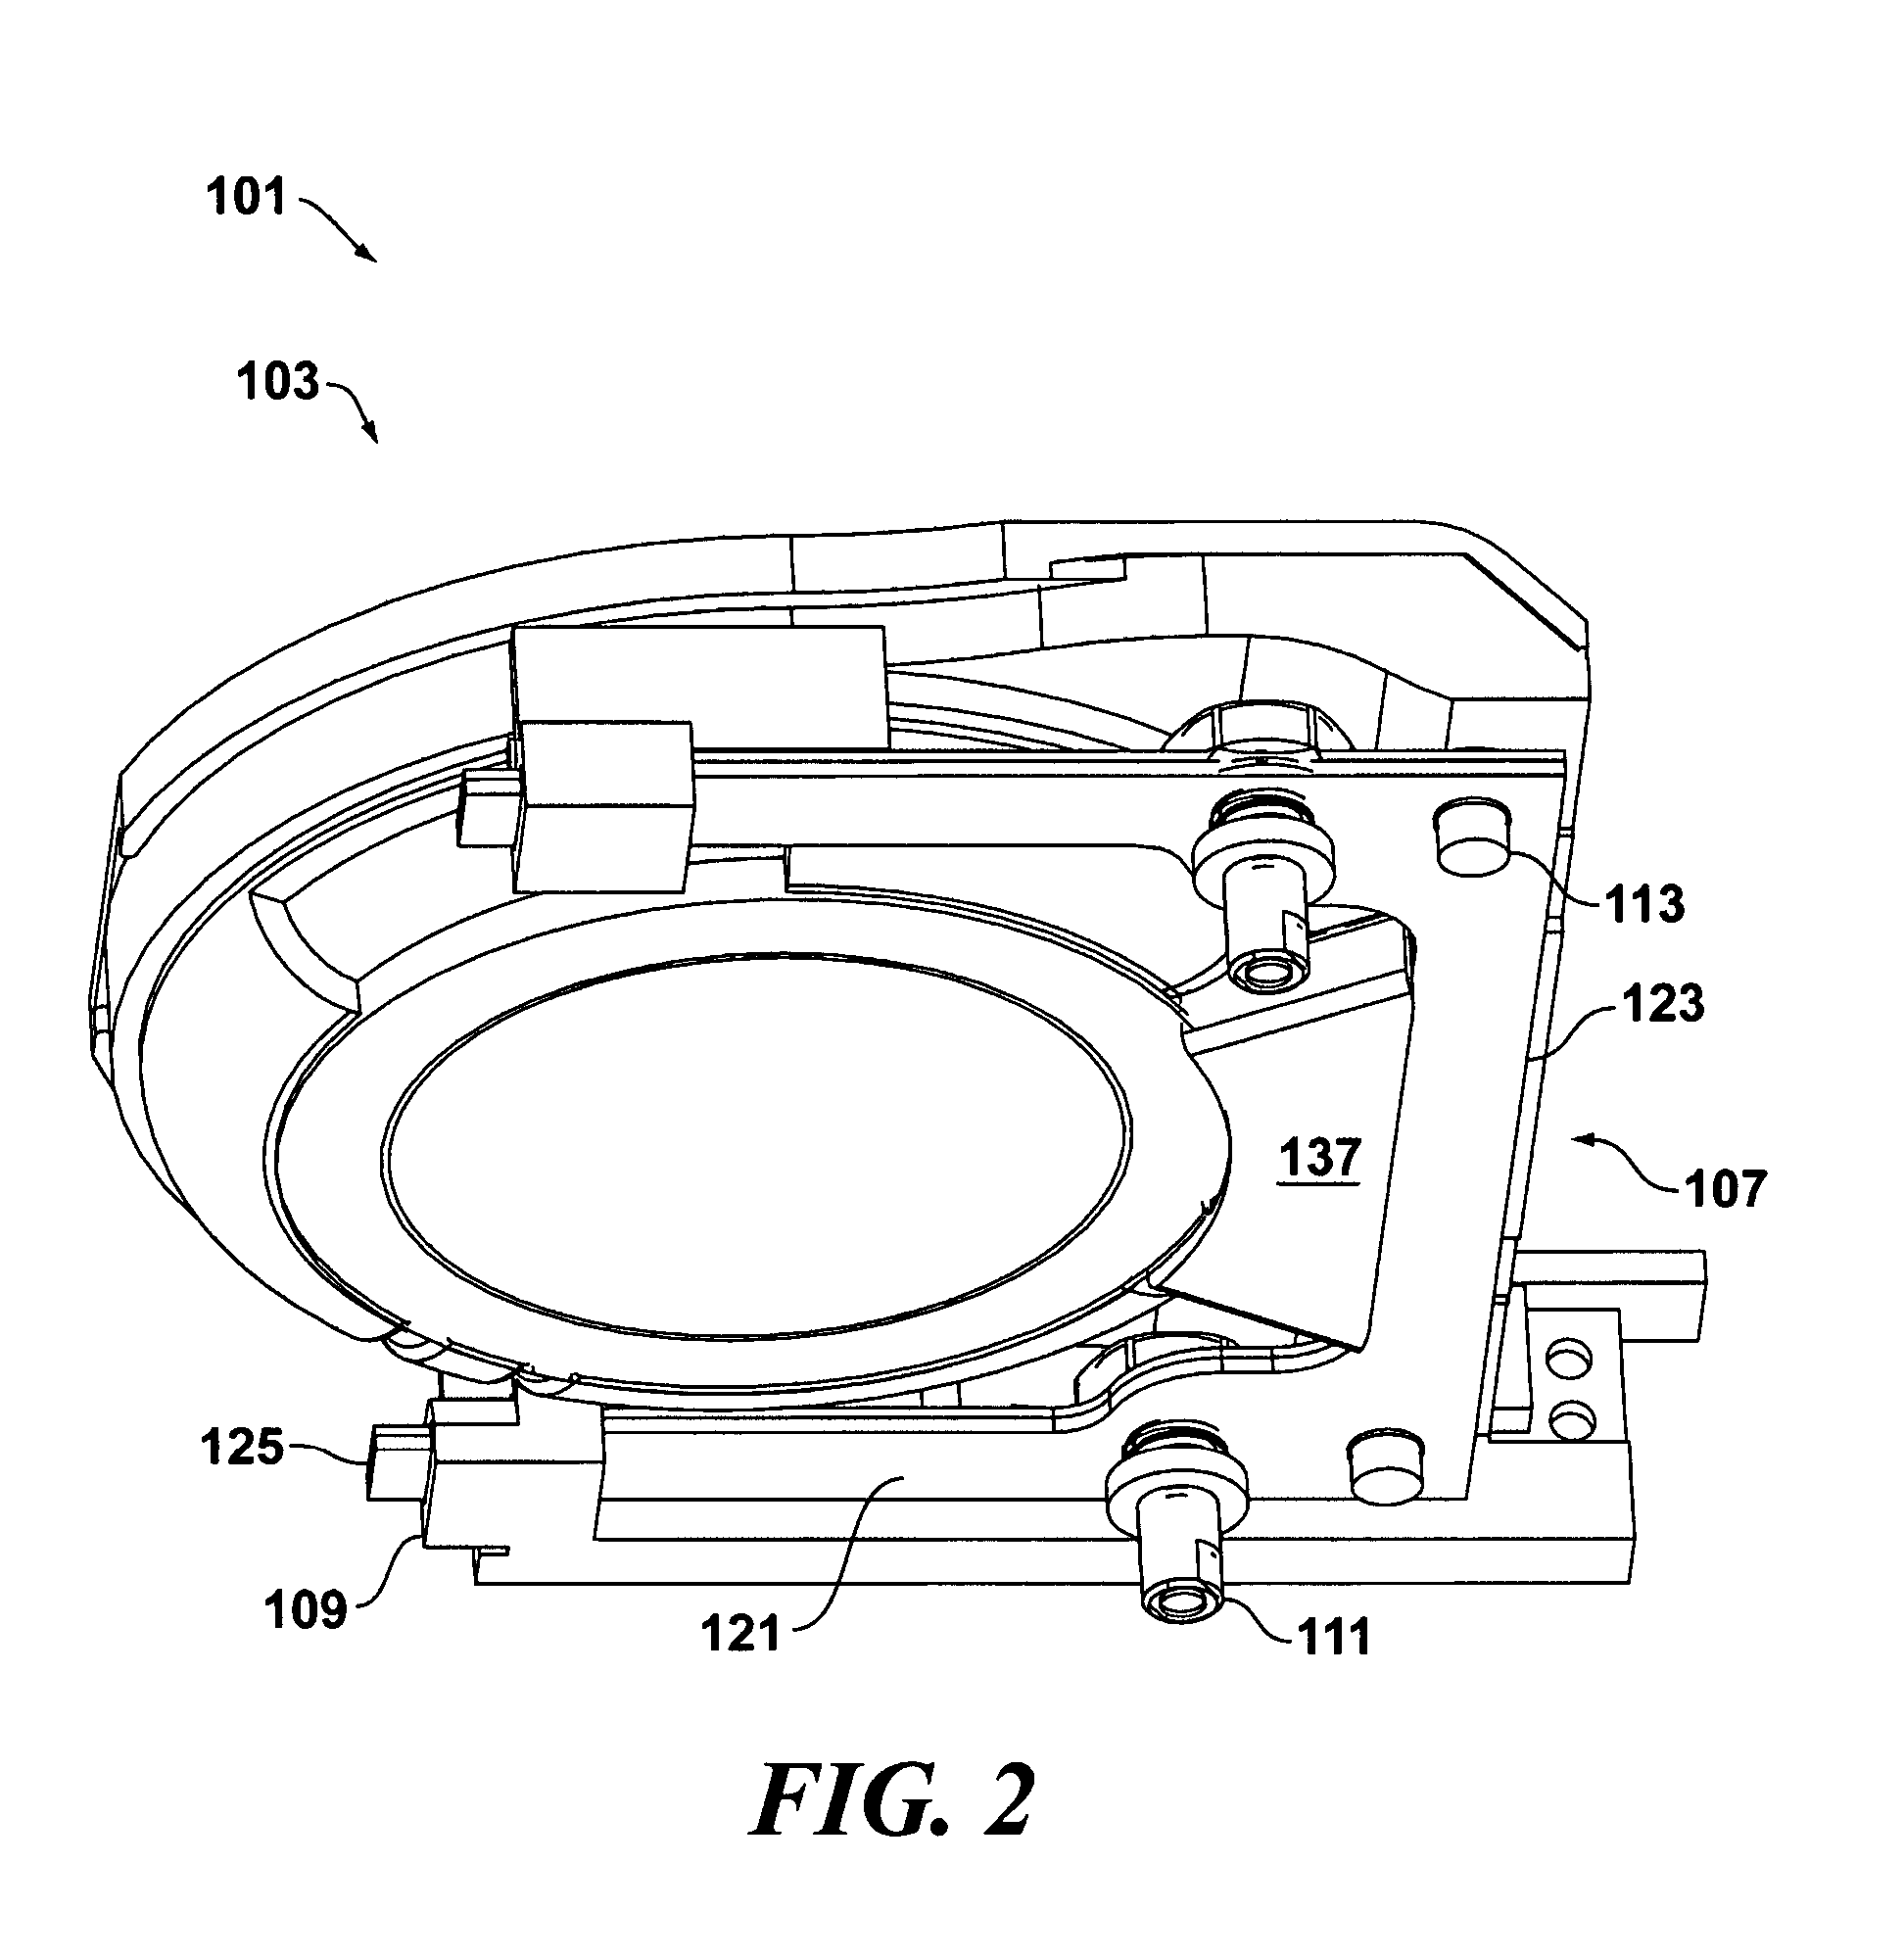 Vibration isolation system for synthetic jet devices